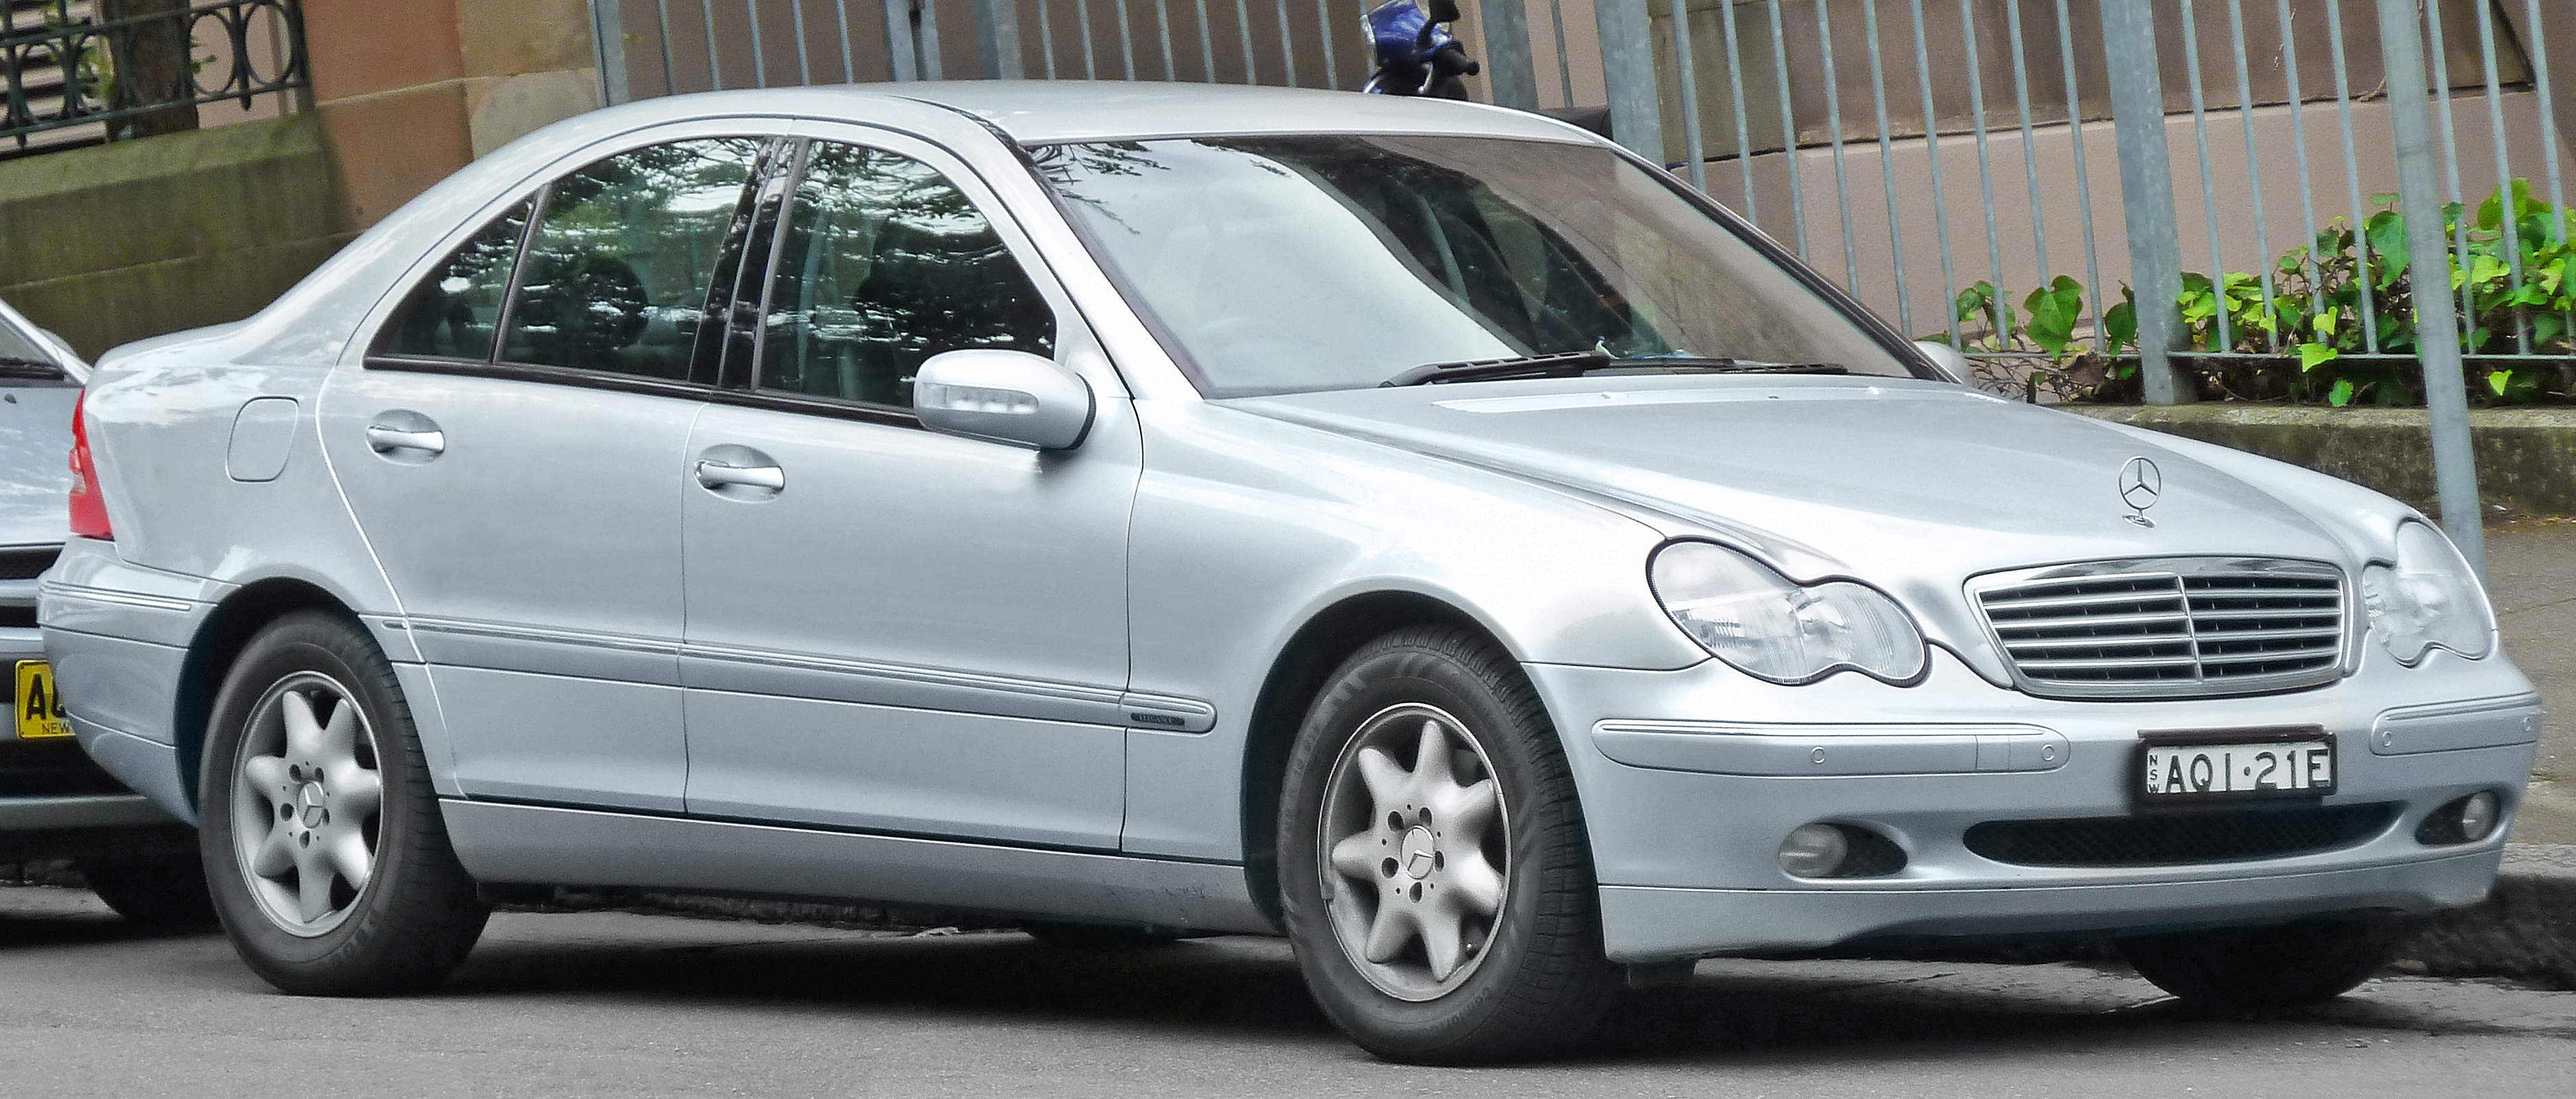 Mercedes Benz C Class 2nd (W203) Generation Exterior Side View